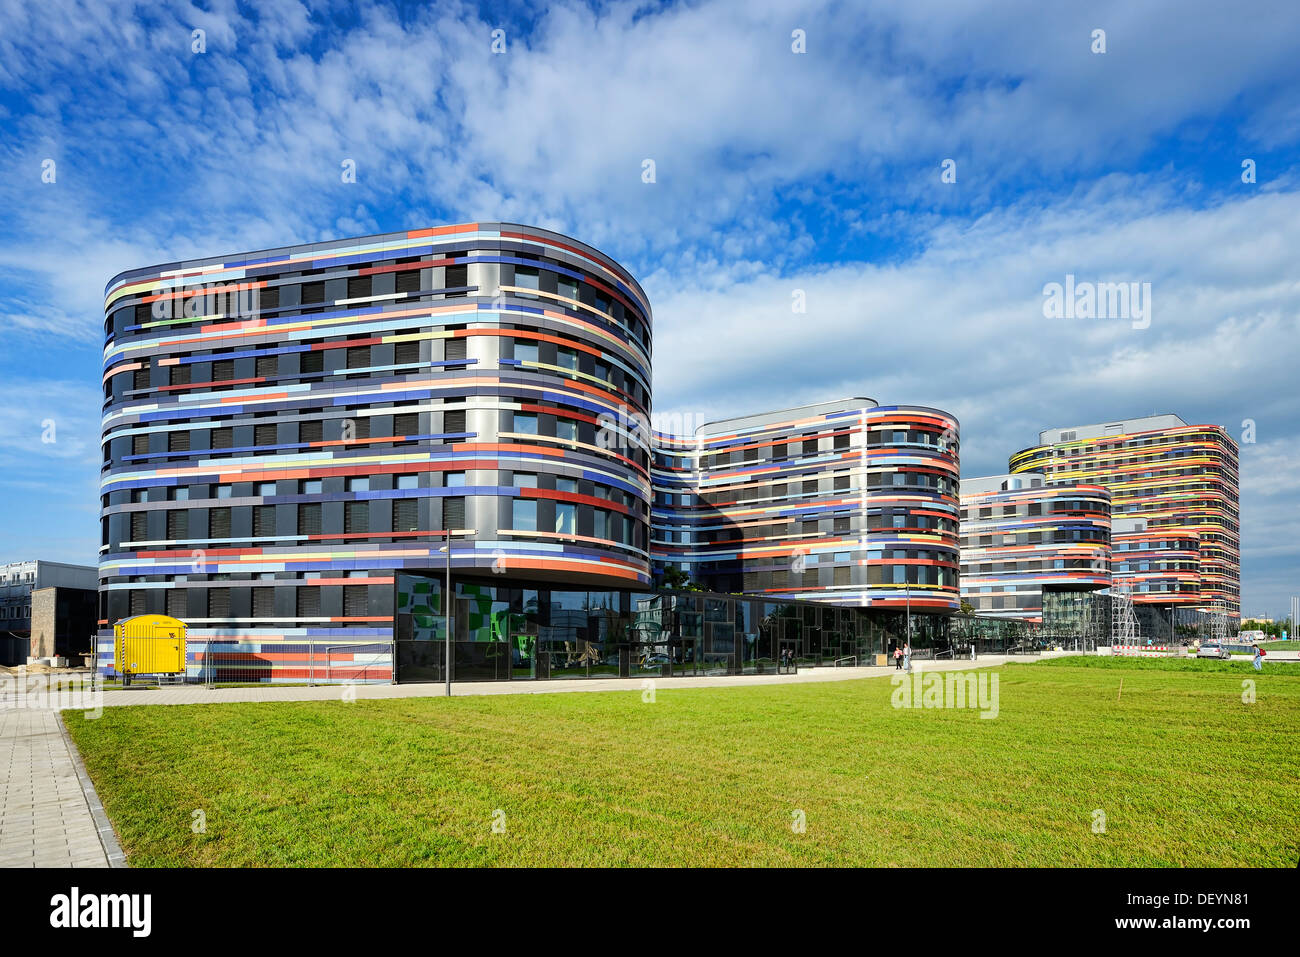 New building of the authority for urban development and environment in Wilhelm's castle, Hamburg, Germany, Europe, Neubau der Be Stock Photo